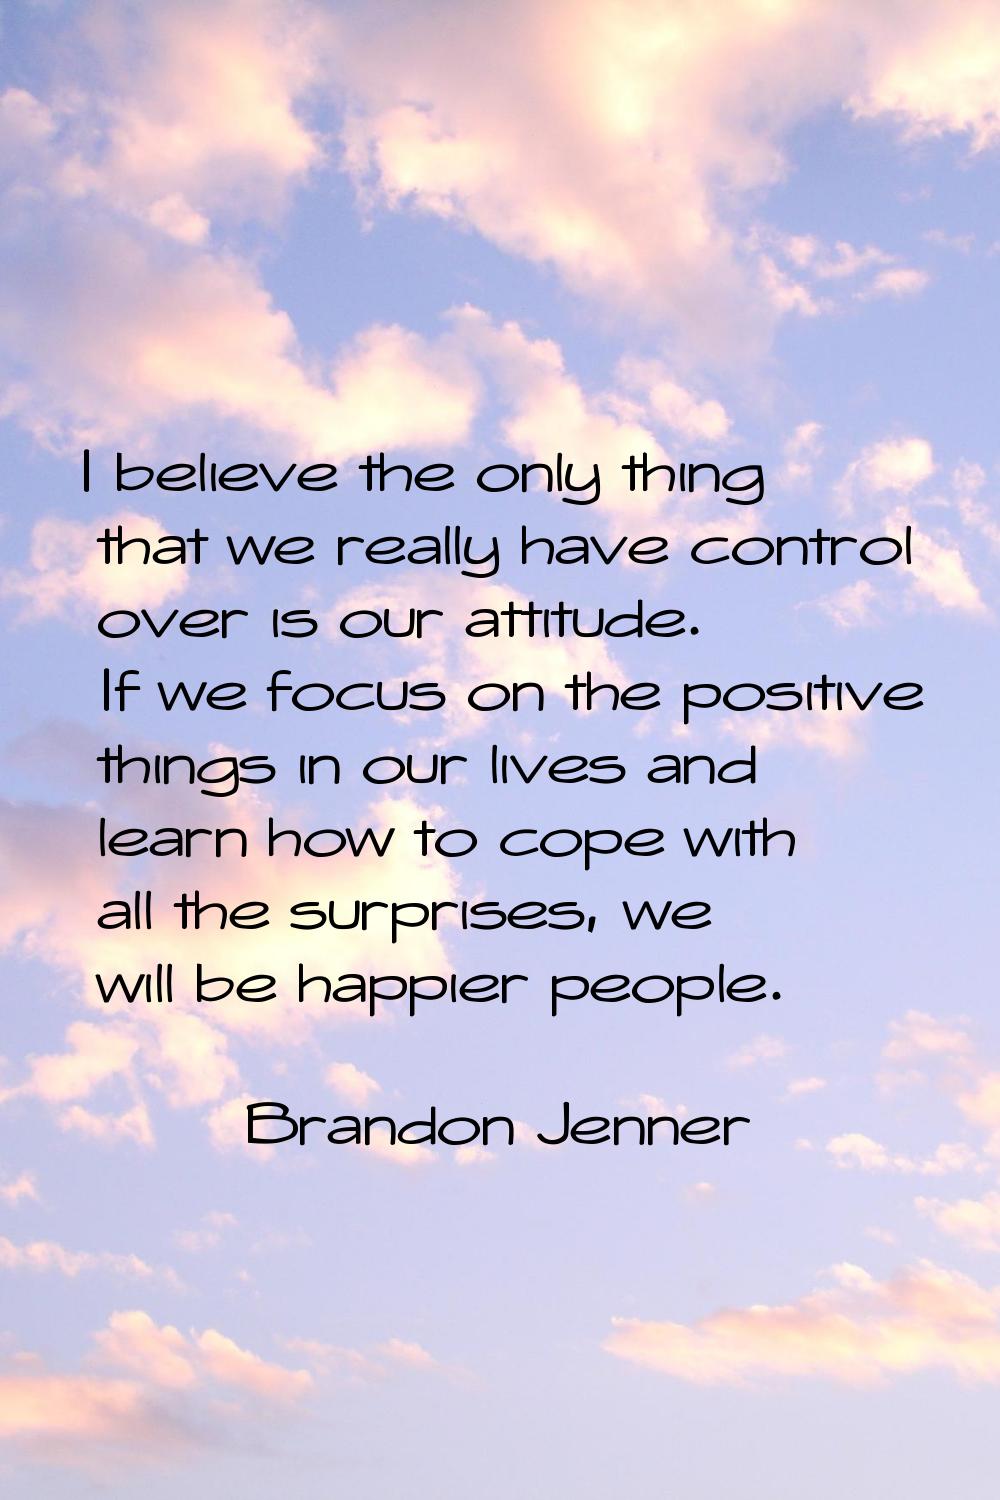 I believe the only thing that we really have control over is our attitude. If we focus on the posit